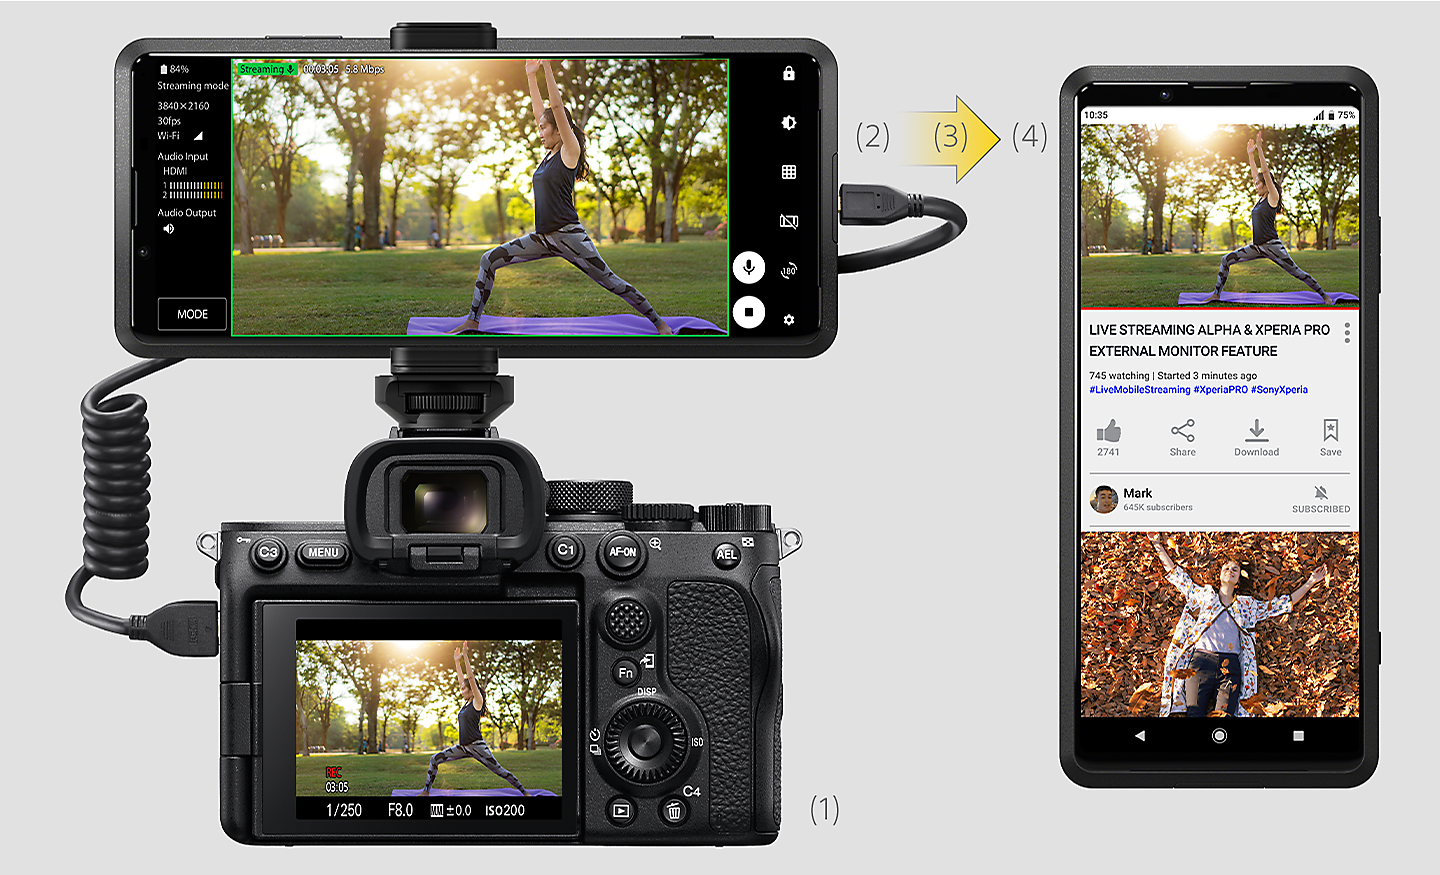 Xperia PRO-I on left connected to Alpha camera as a 4K monitor, live streaming to Xperia PRO-I on right 